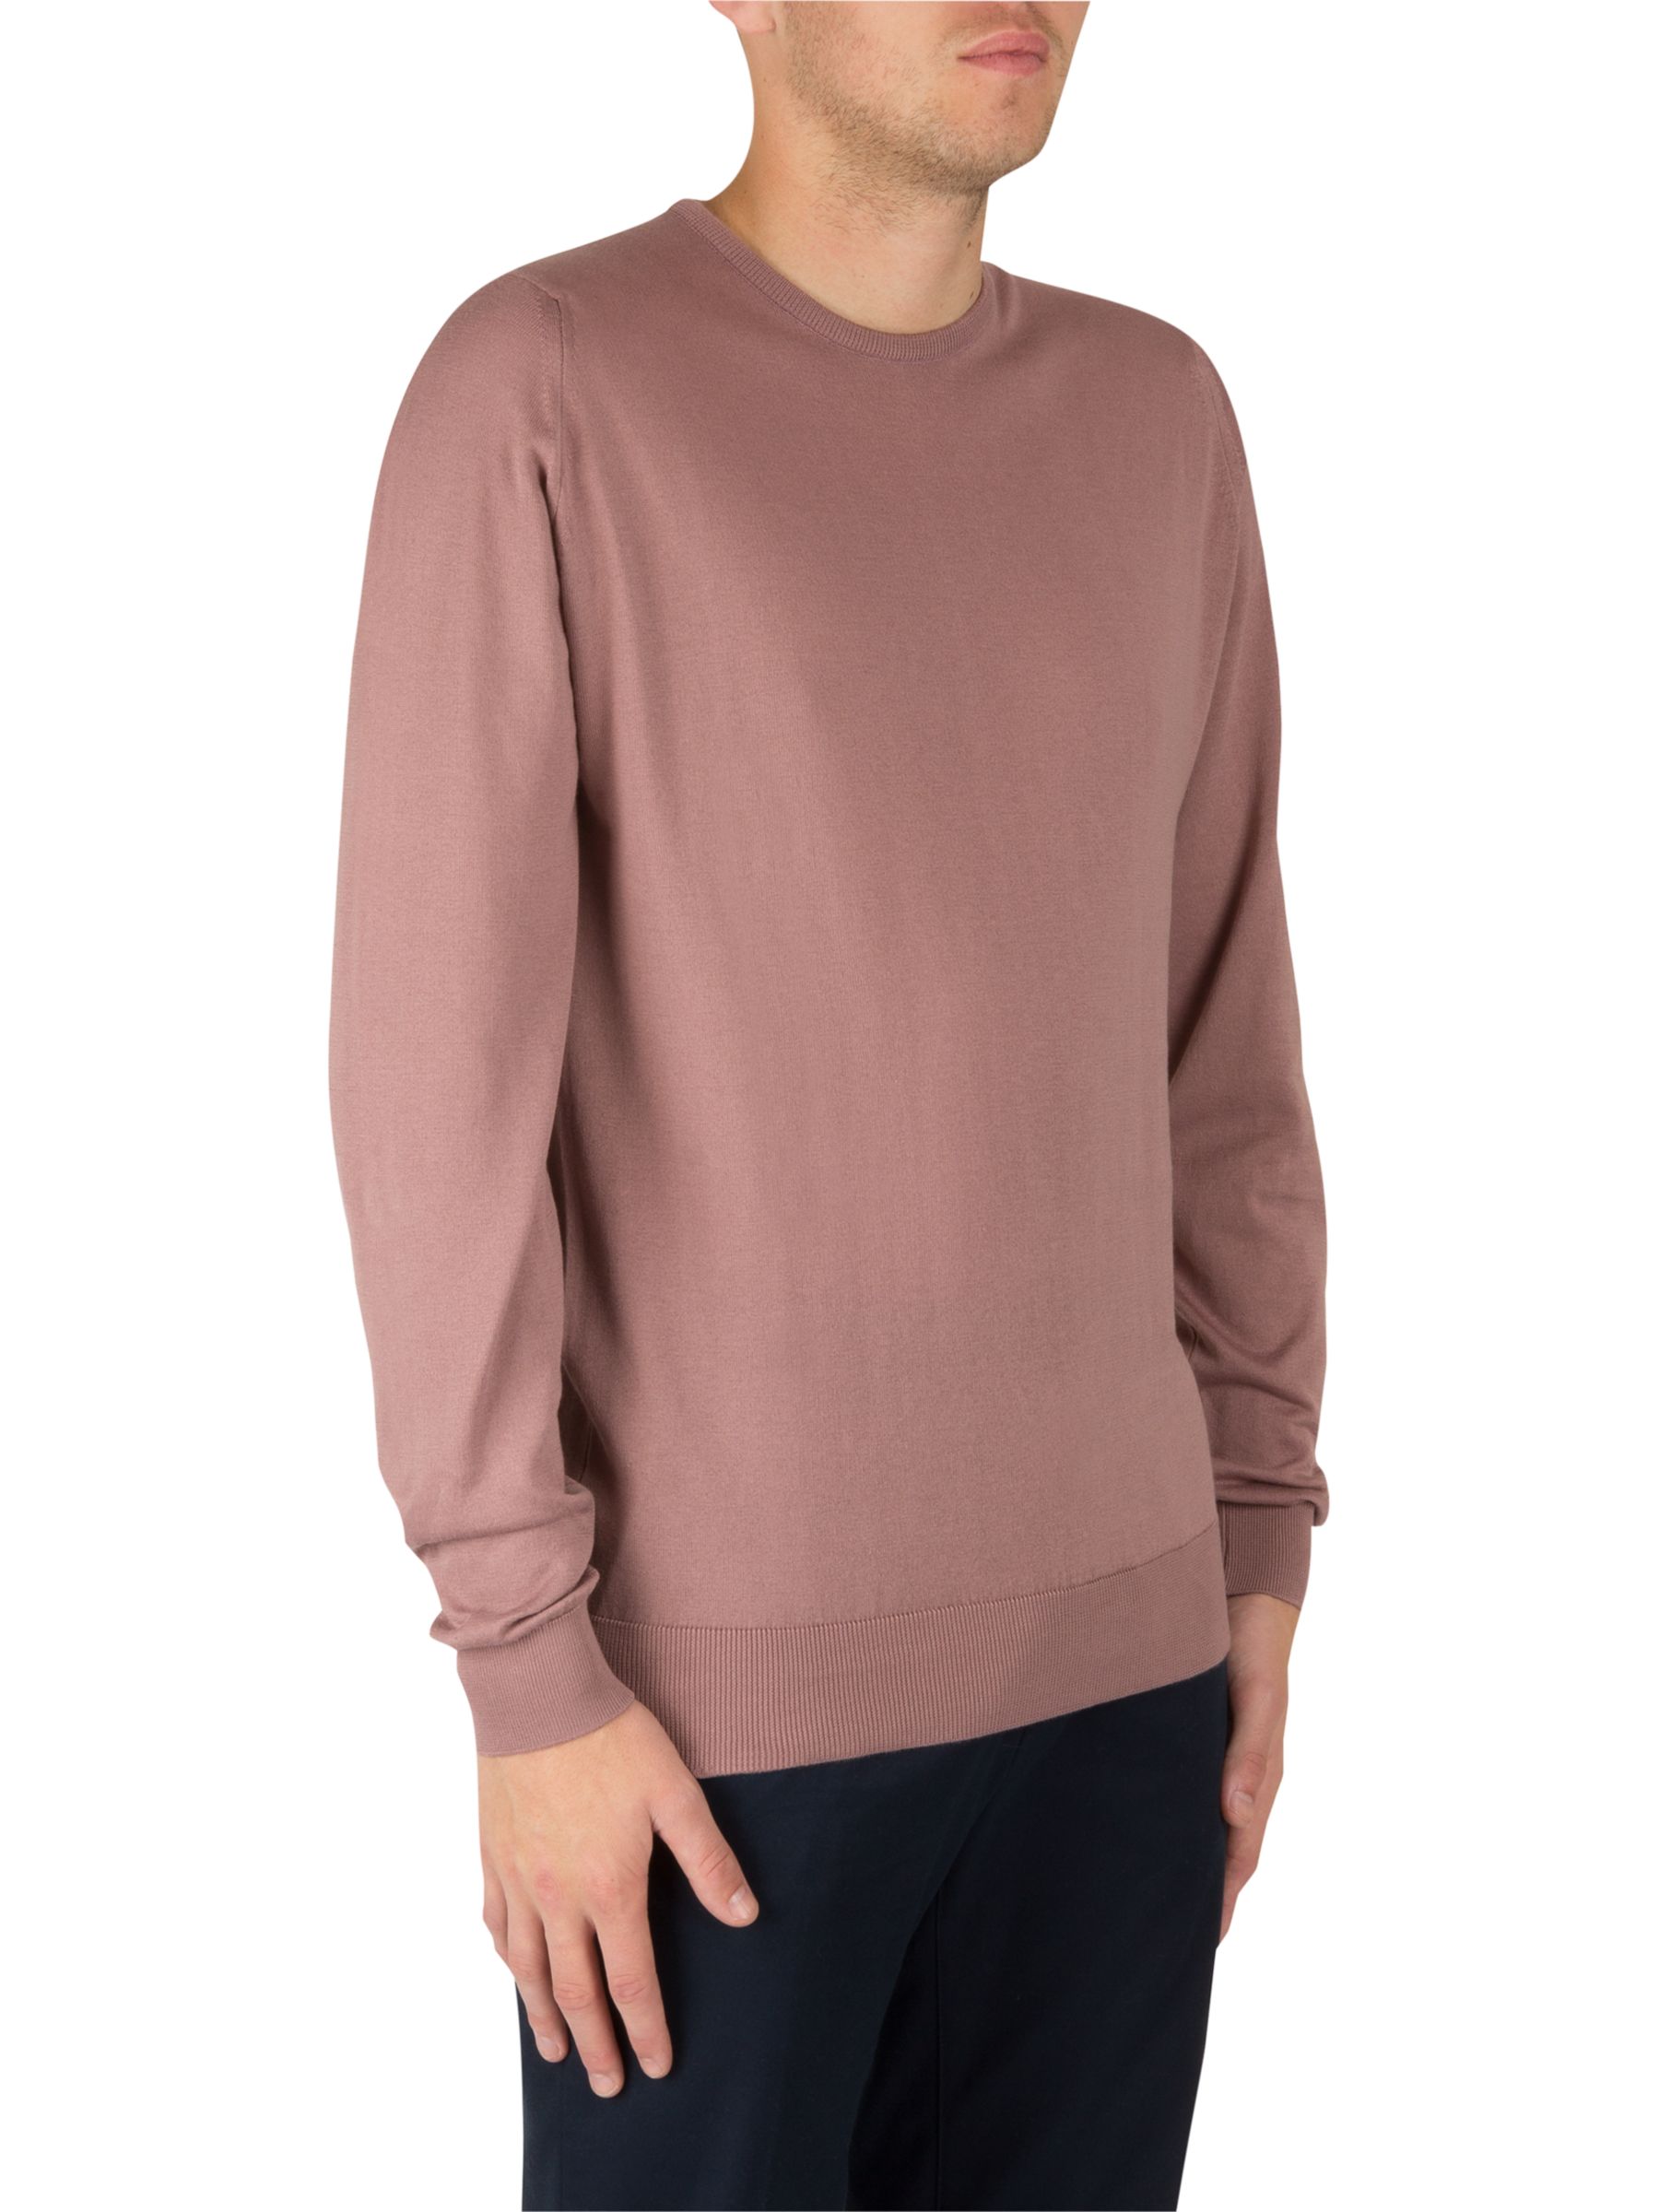 John Smedley Hatfield Cotton Pullover Review